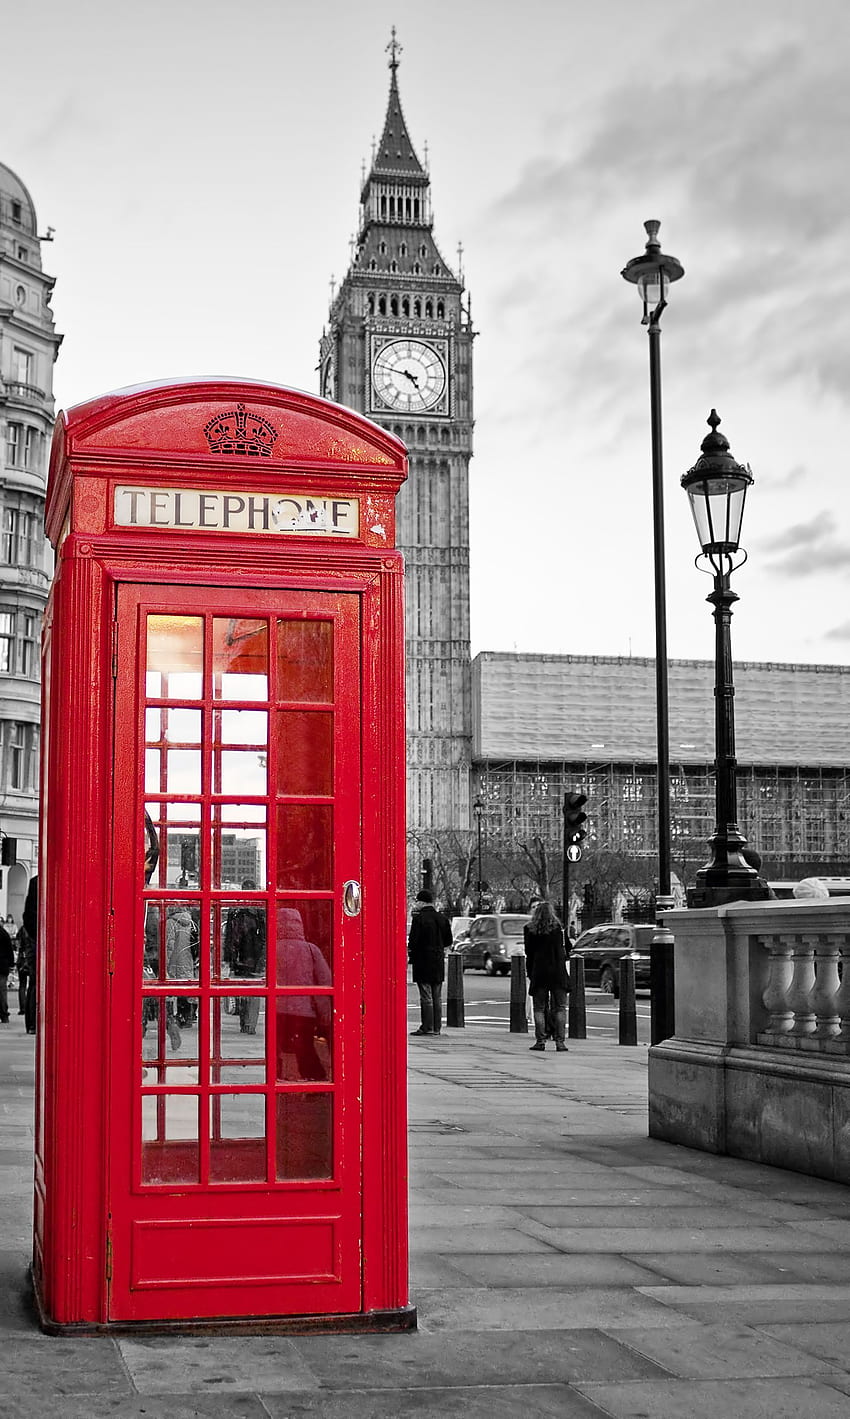 Memories of London, coffee on a cool afternoon like this and Background for your iPhone, iPad,. Black and white background, Red phone booth, Big ben, England HD phone wallpaper